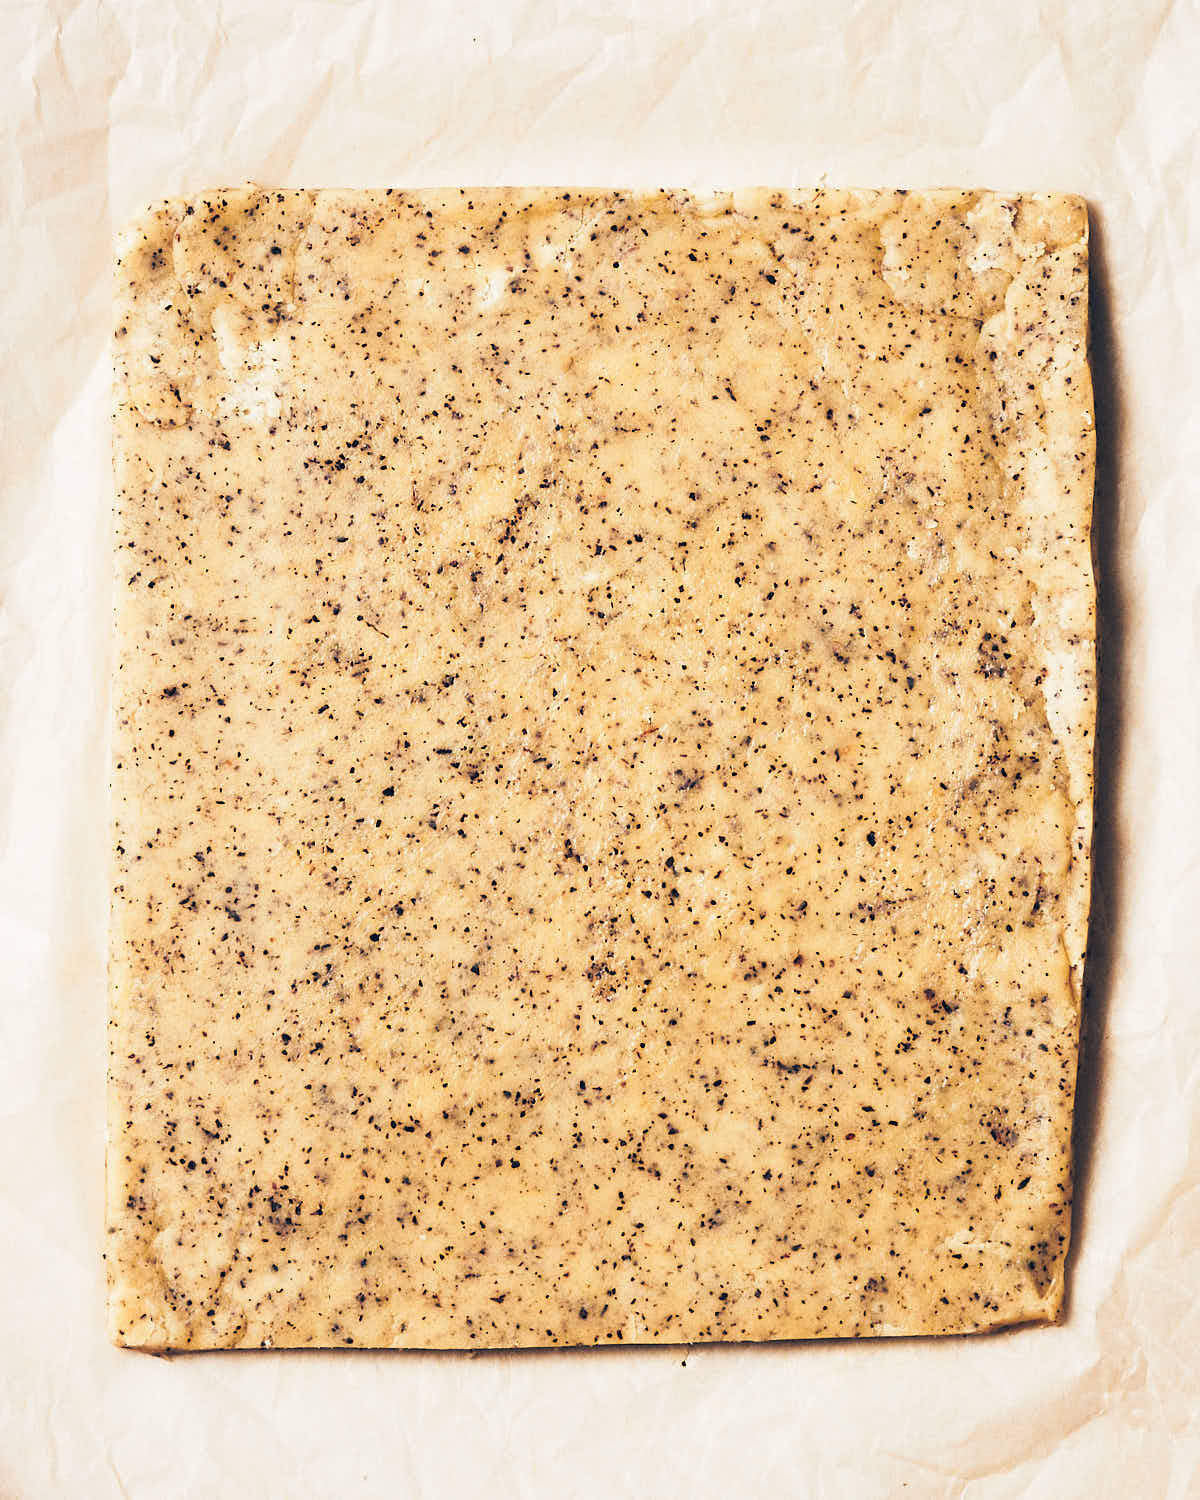 Earl grey shortbread dough that has been rolled into a square on parchment paper.